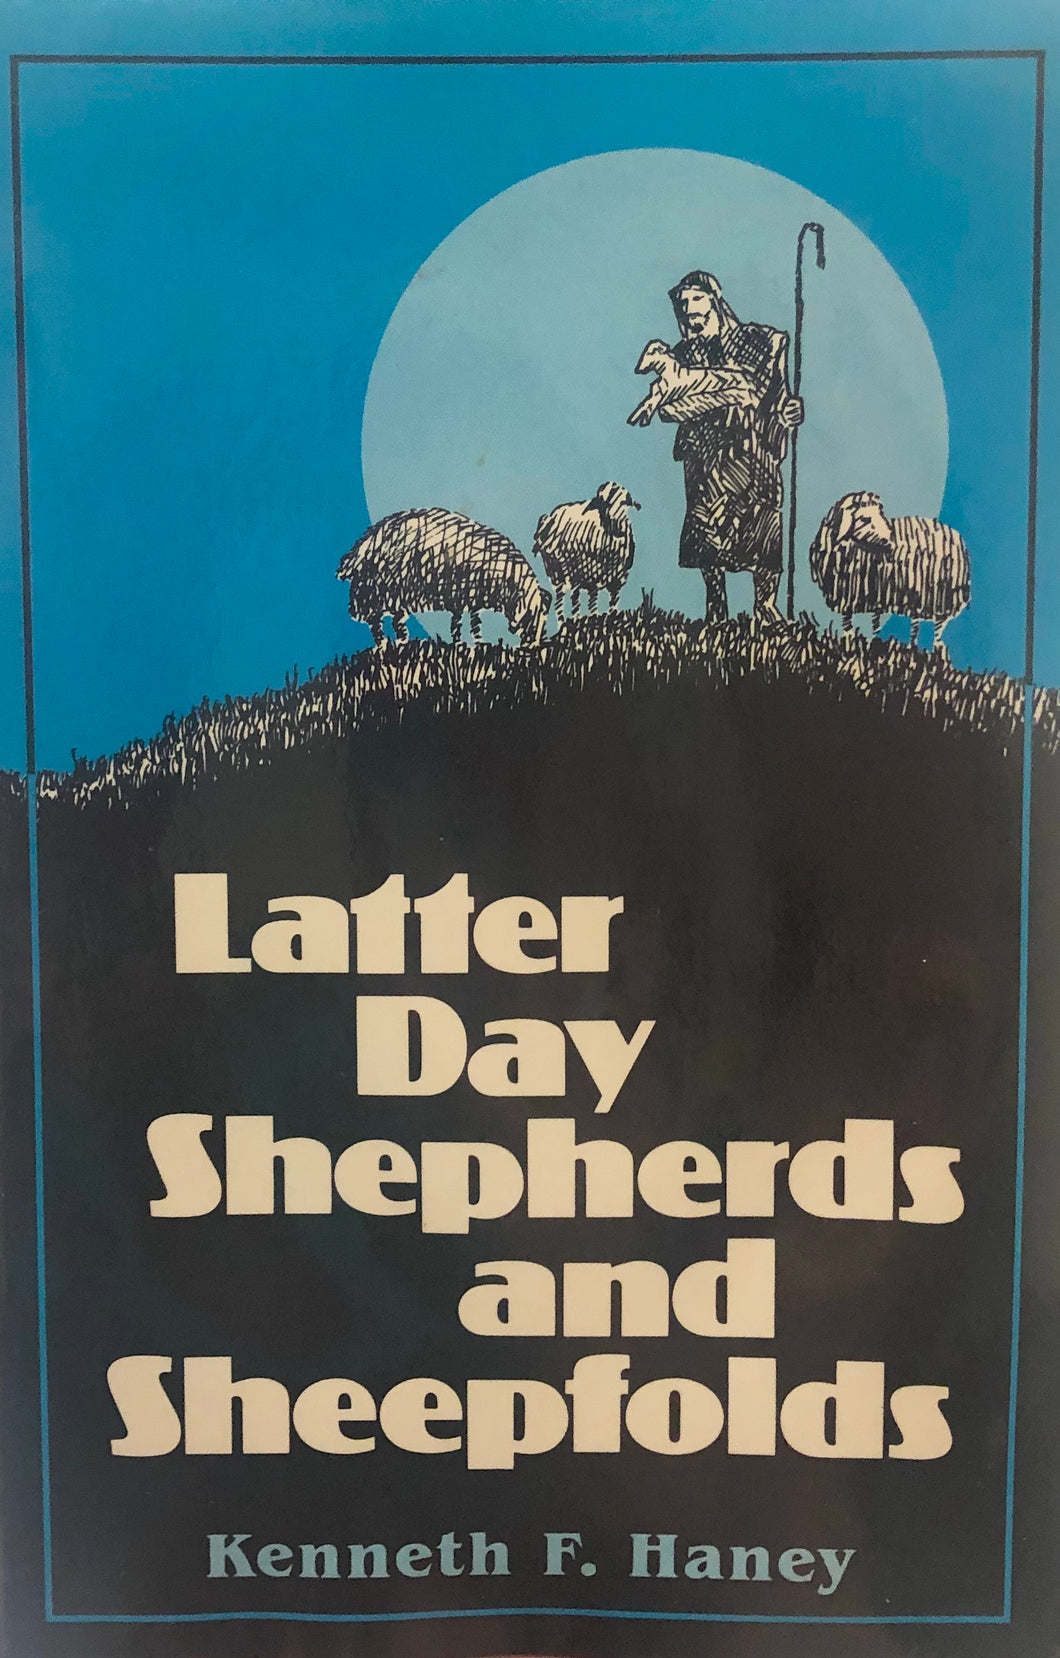 Latter Day Shepherds and Sheepfolds by Kenneth F. Haney